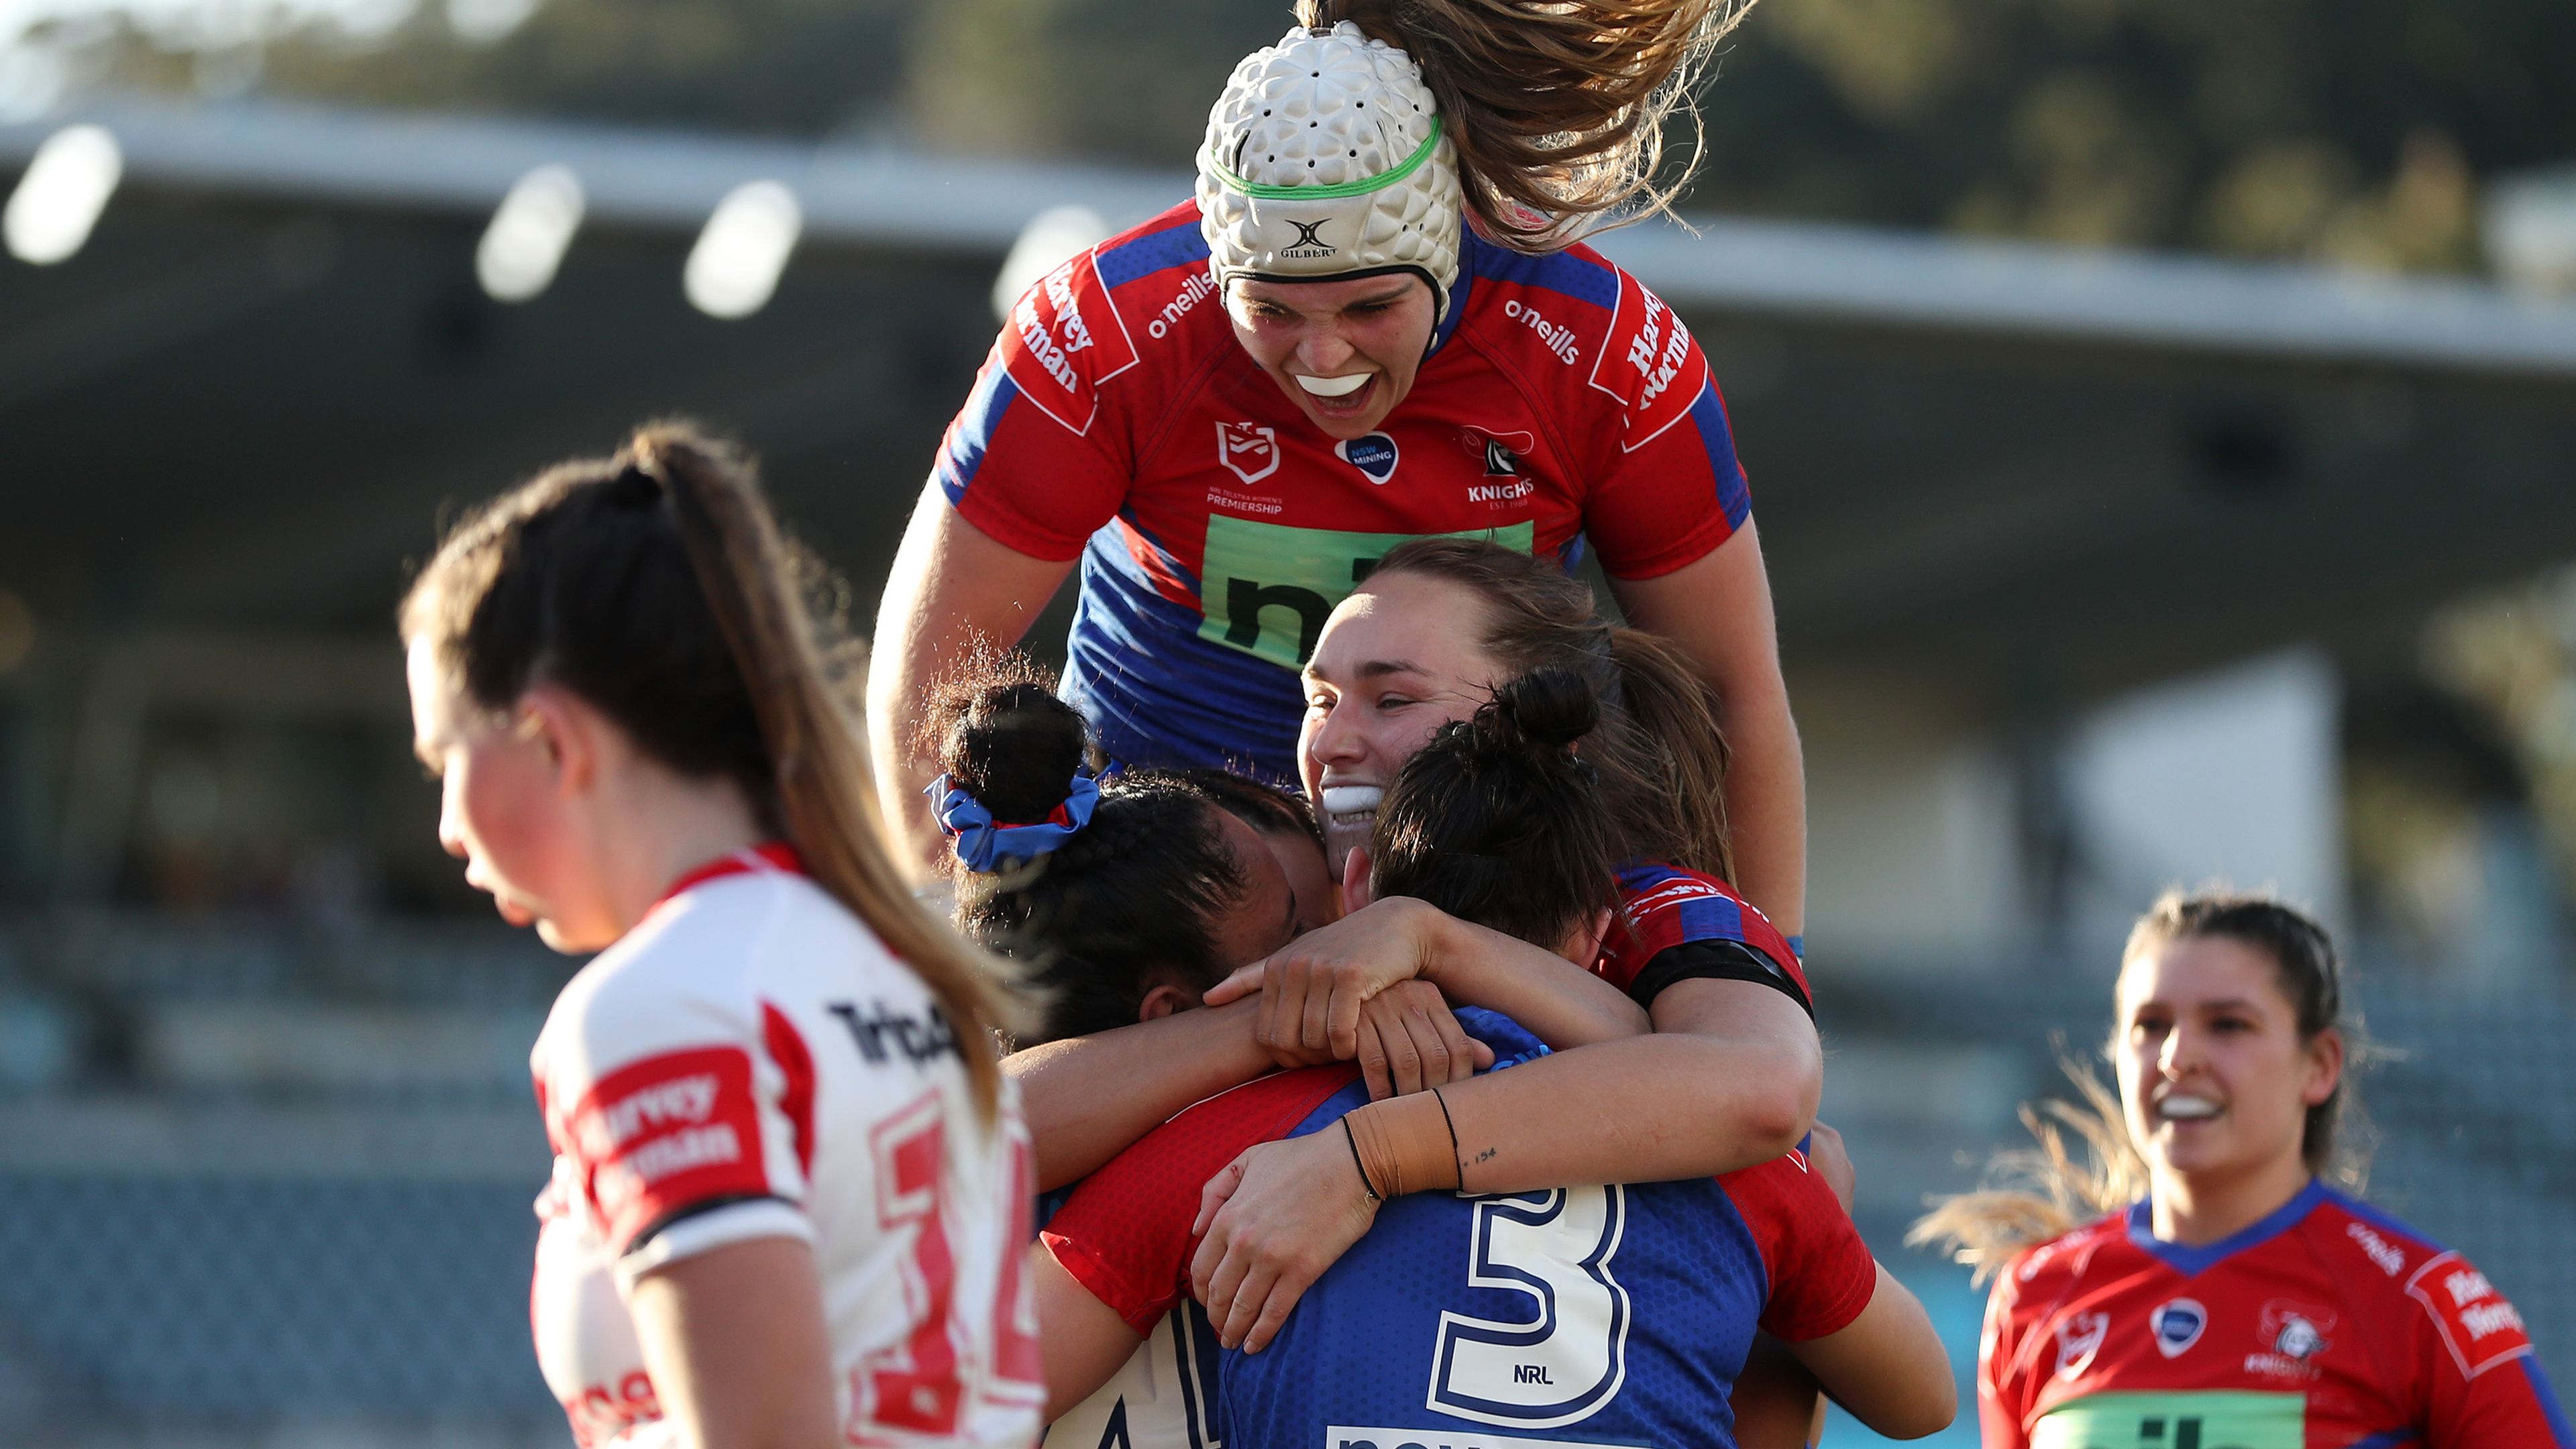 NRLW finals 2022 locked in: Andrew Johns text helps spur Knights to emphatic victory